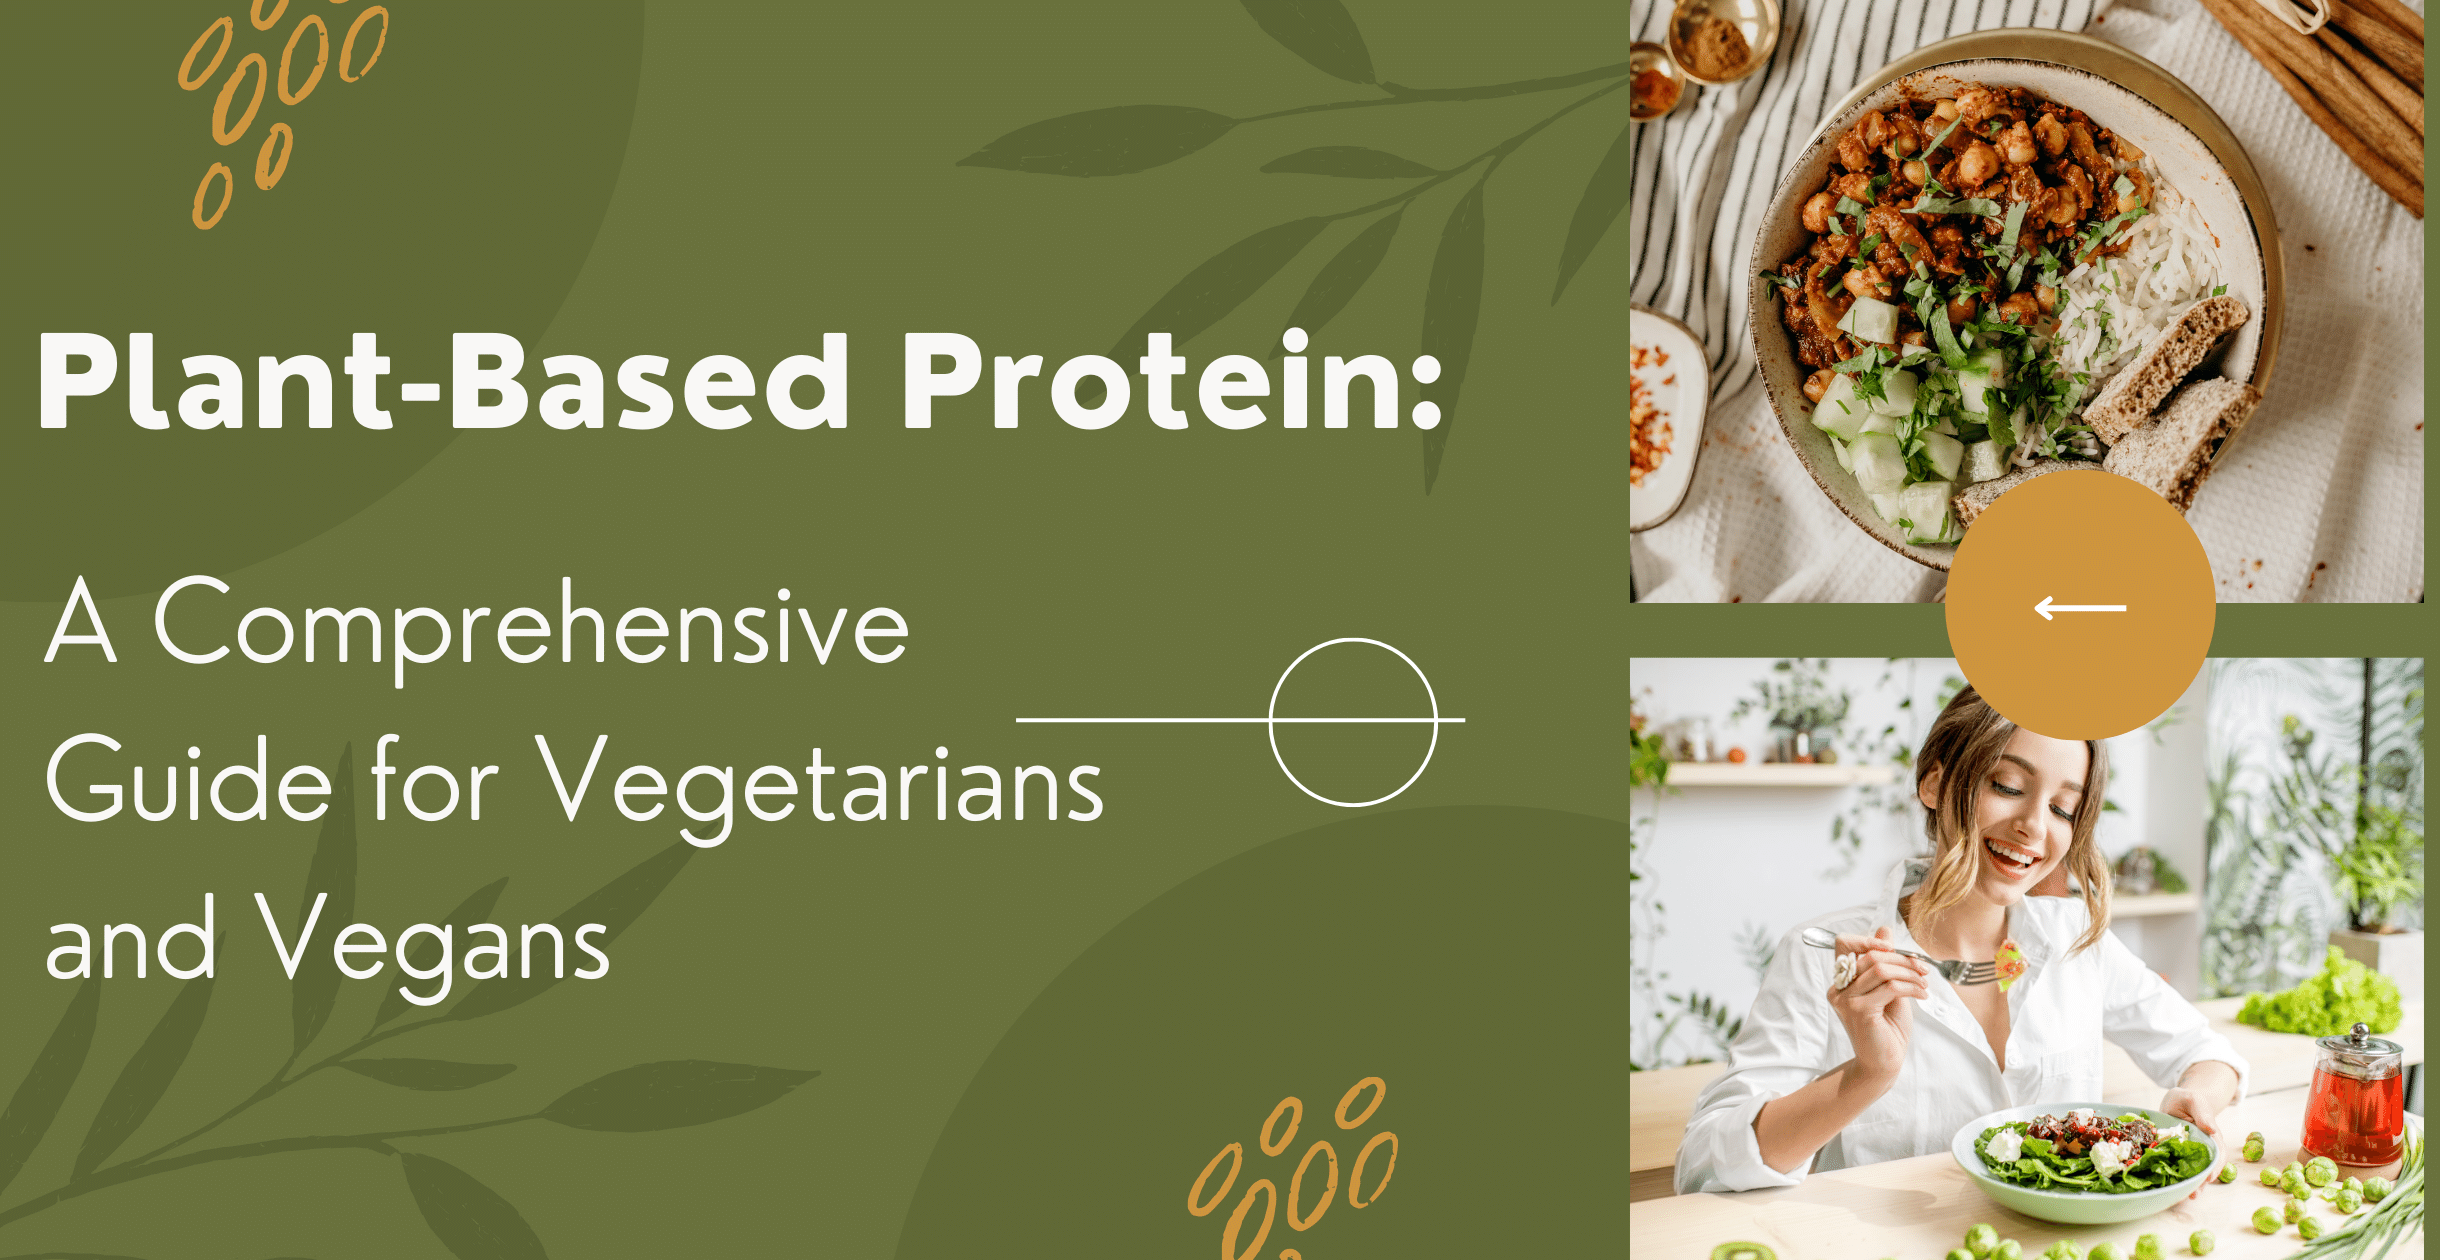 Plant-Based Protein: A Comprehensive Guide for Vegetarians and Vegans